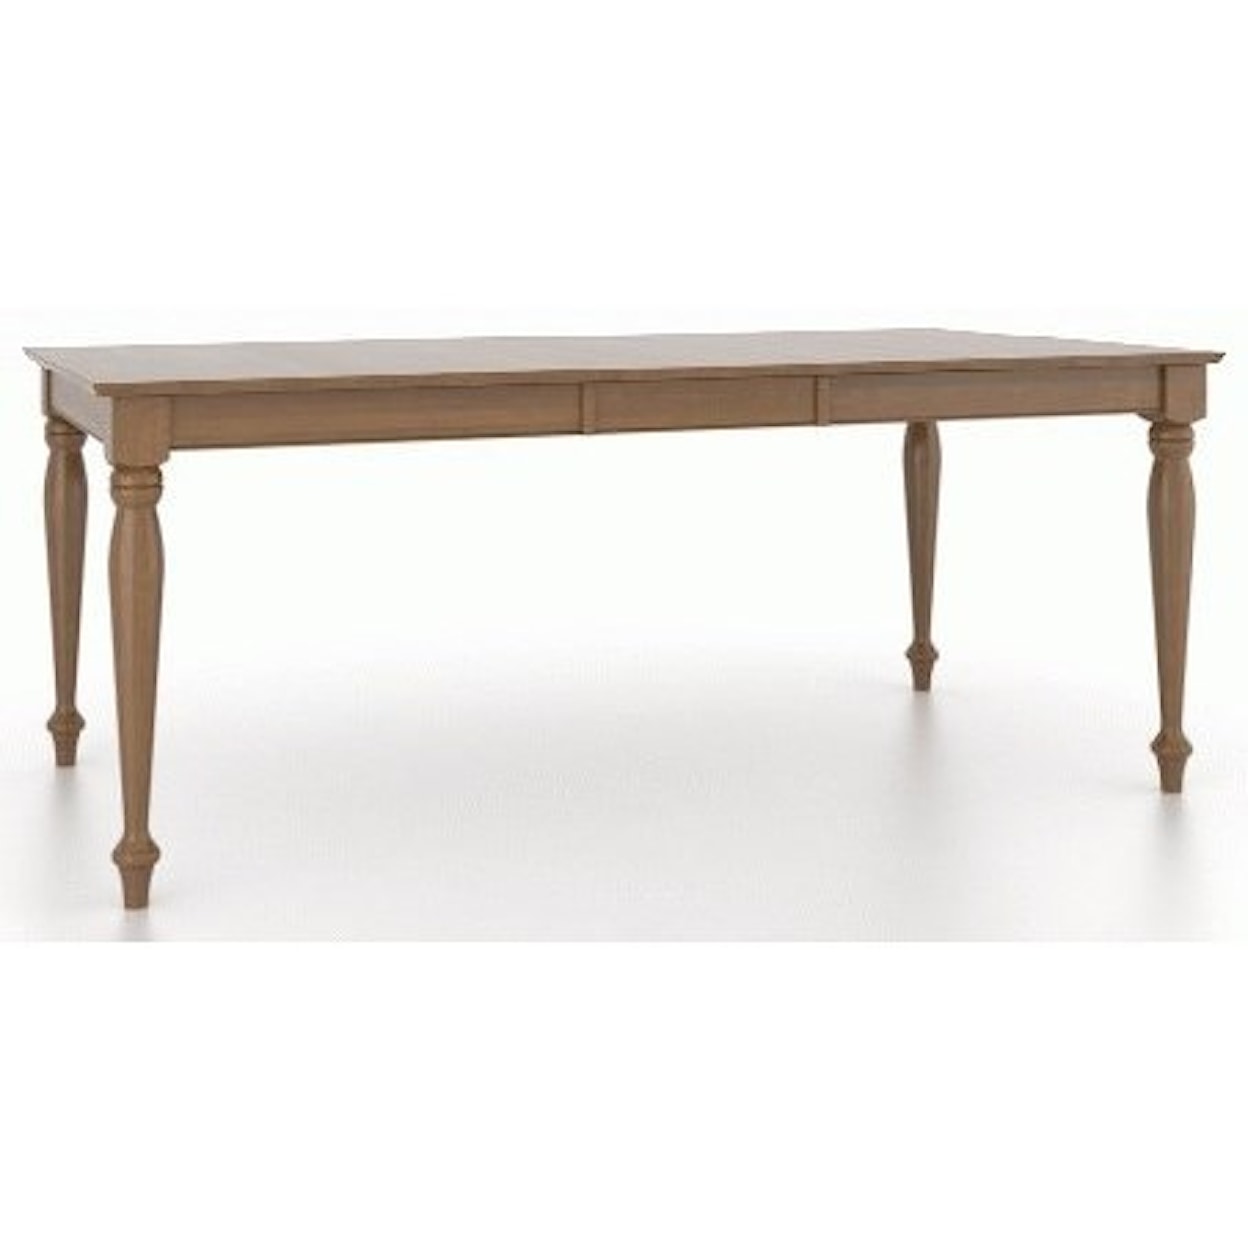 Canadel Gourmet Customizable Rect. Table w/ Leaf